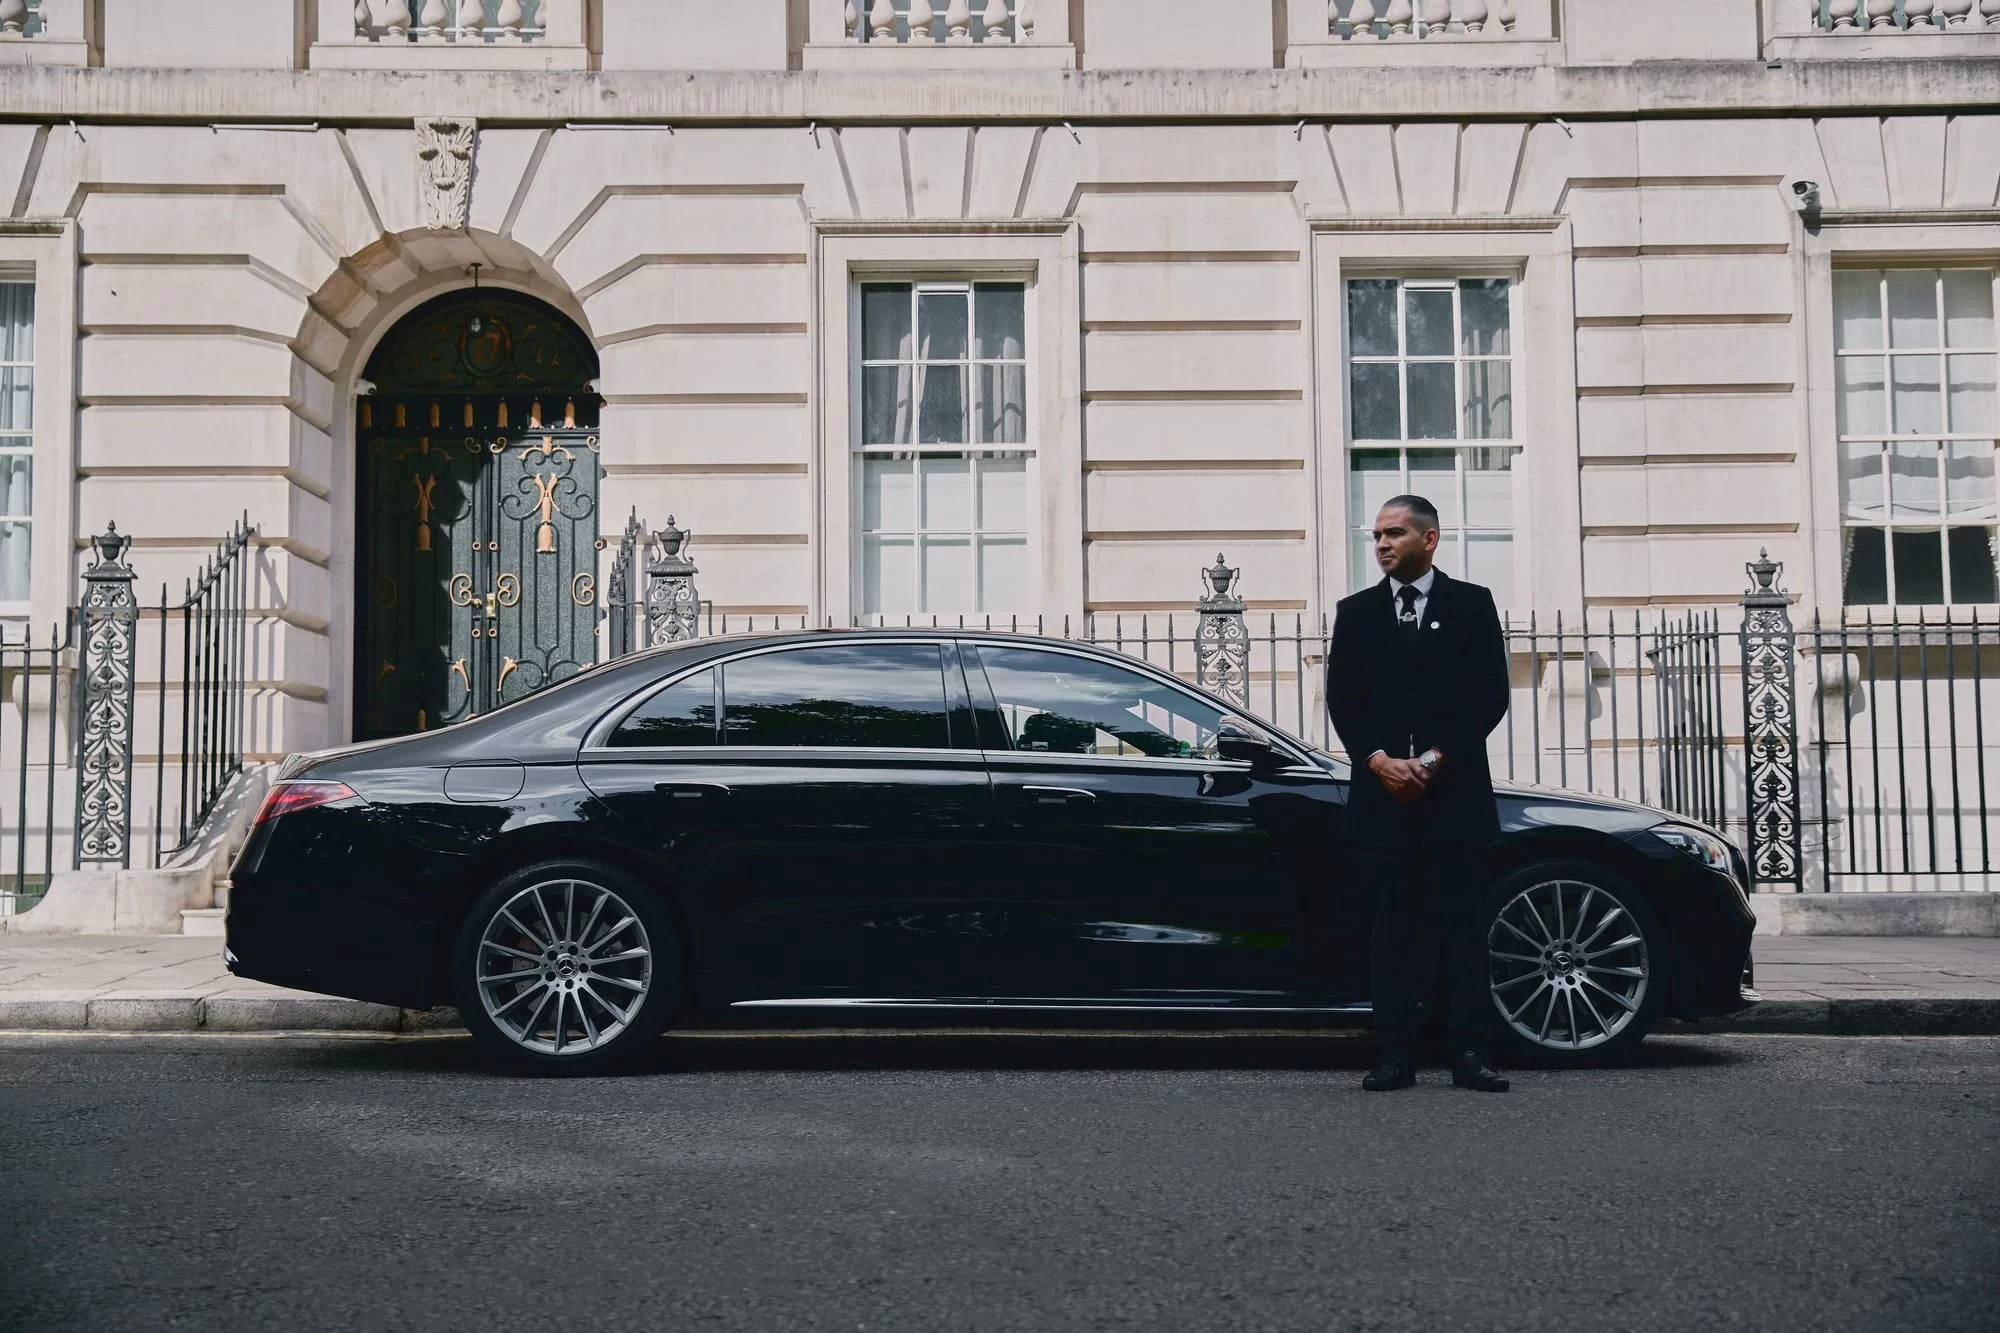 Private Chauffeur in London - Crawfords Cars provides luxury car service with chauffeur